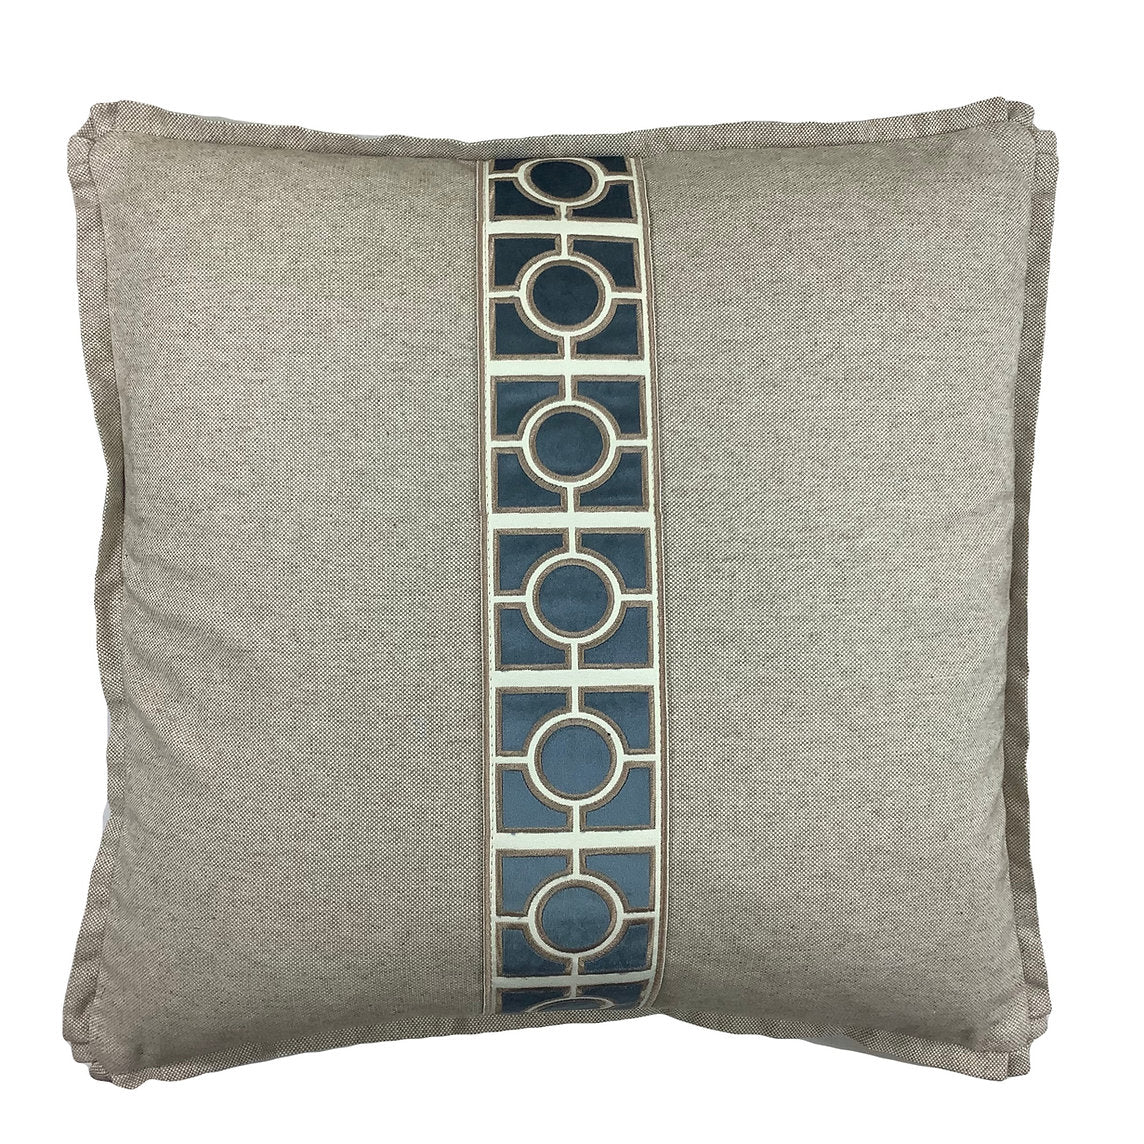 ANTHEM PILLOW TAUPE WITH BLUE CIRCLE RIBBON